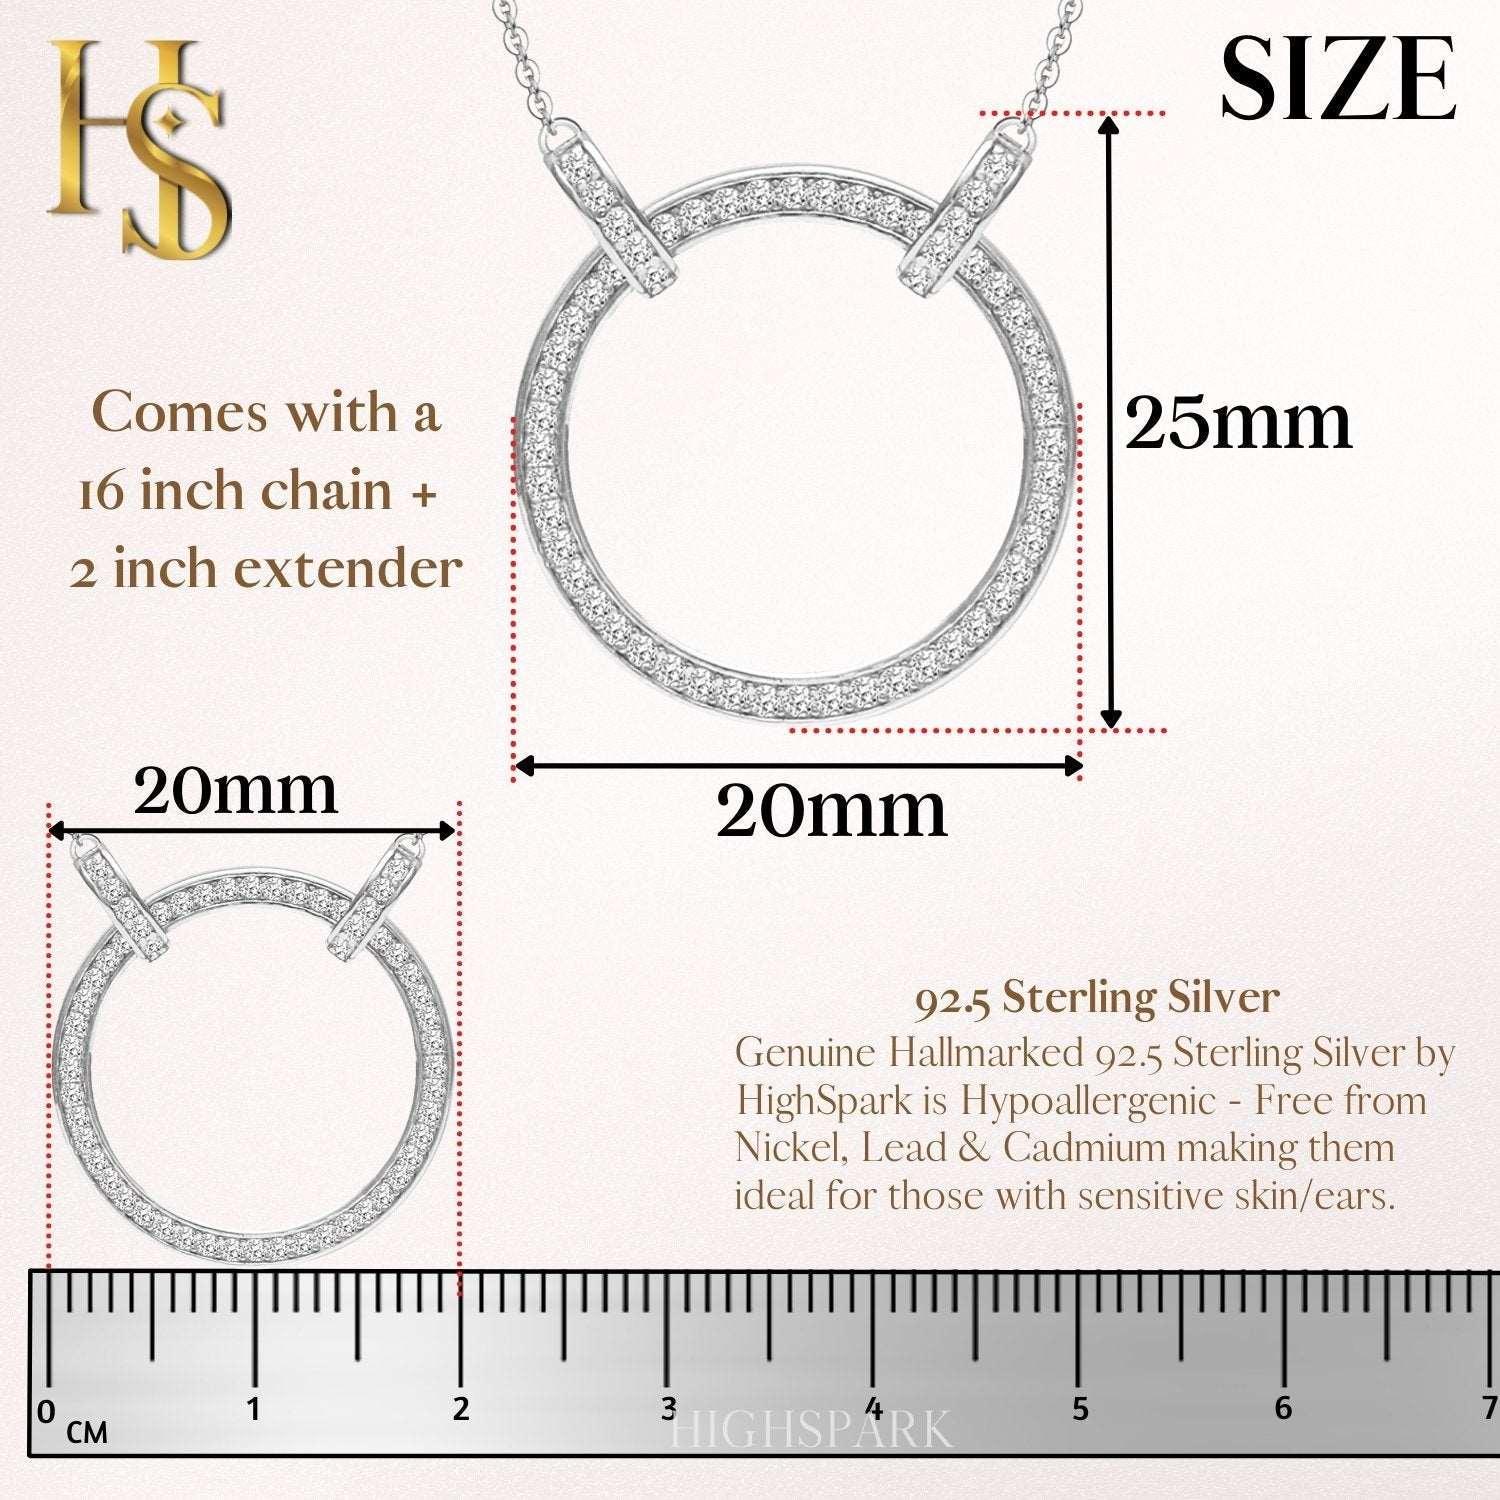 Circle Of Life - Real Diamond & Sterling Silver Pendants With 18” Chain